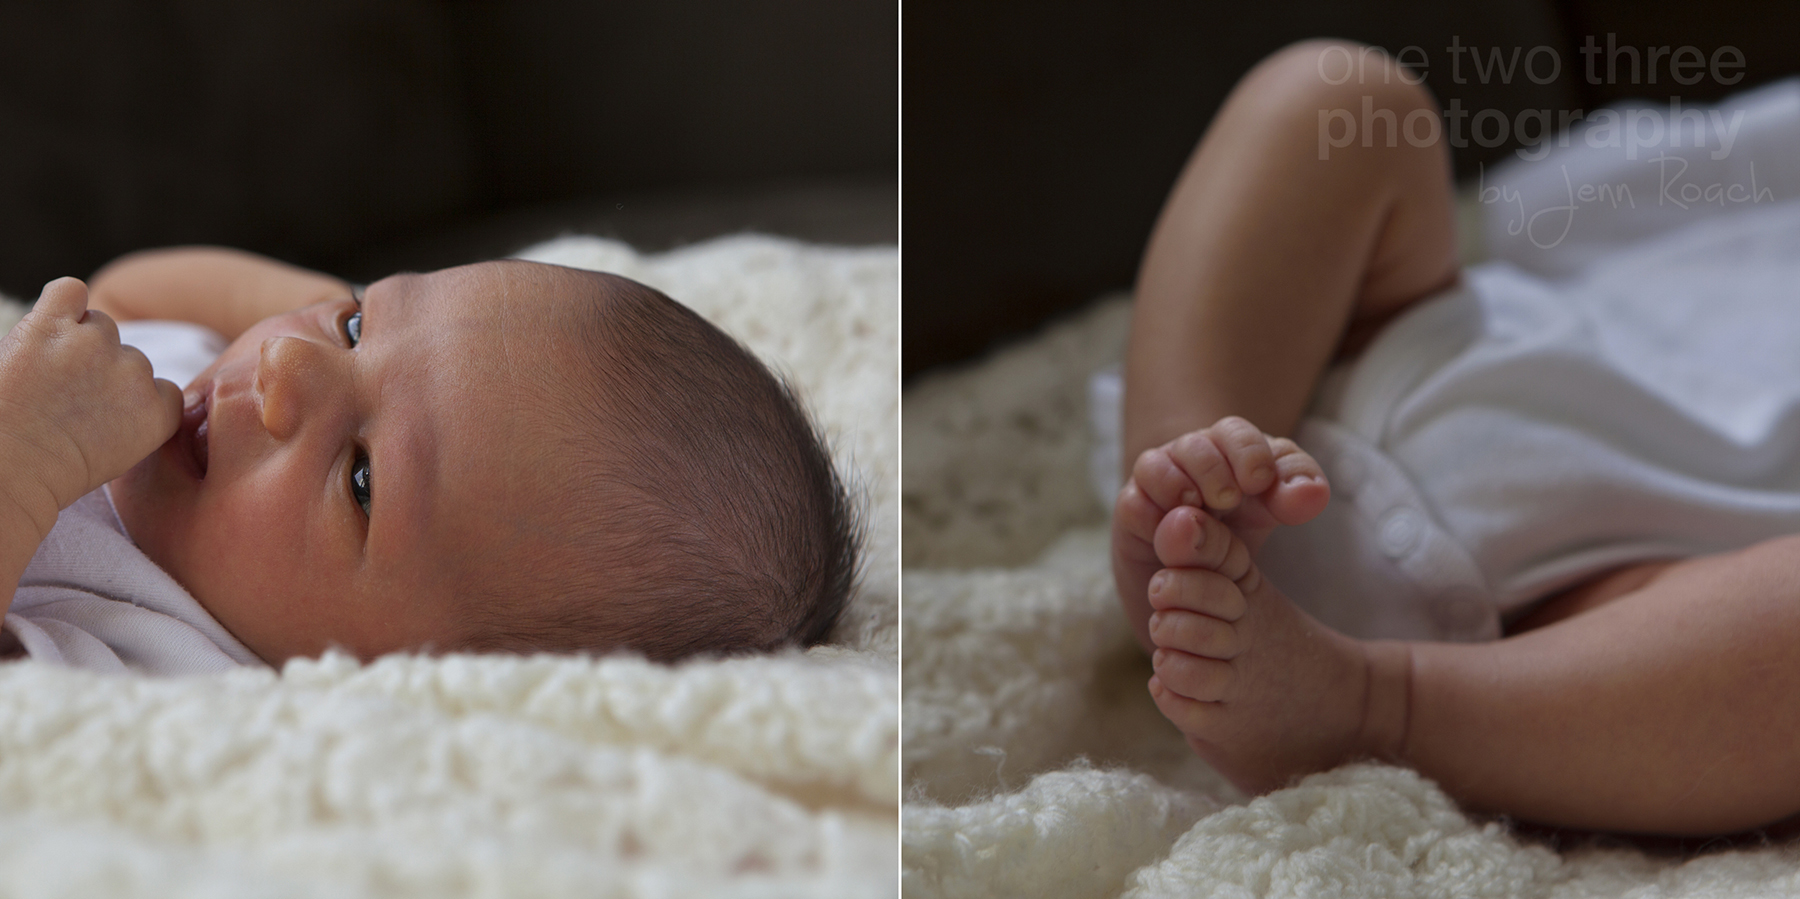 Newborn Photographer that specializes in candids and natural sessions